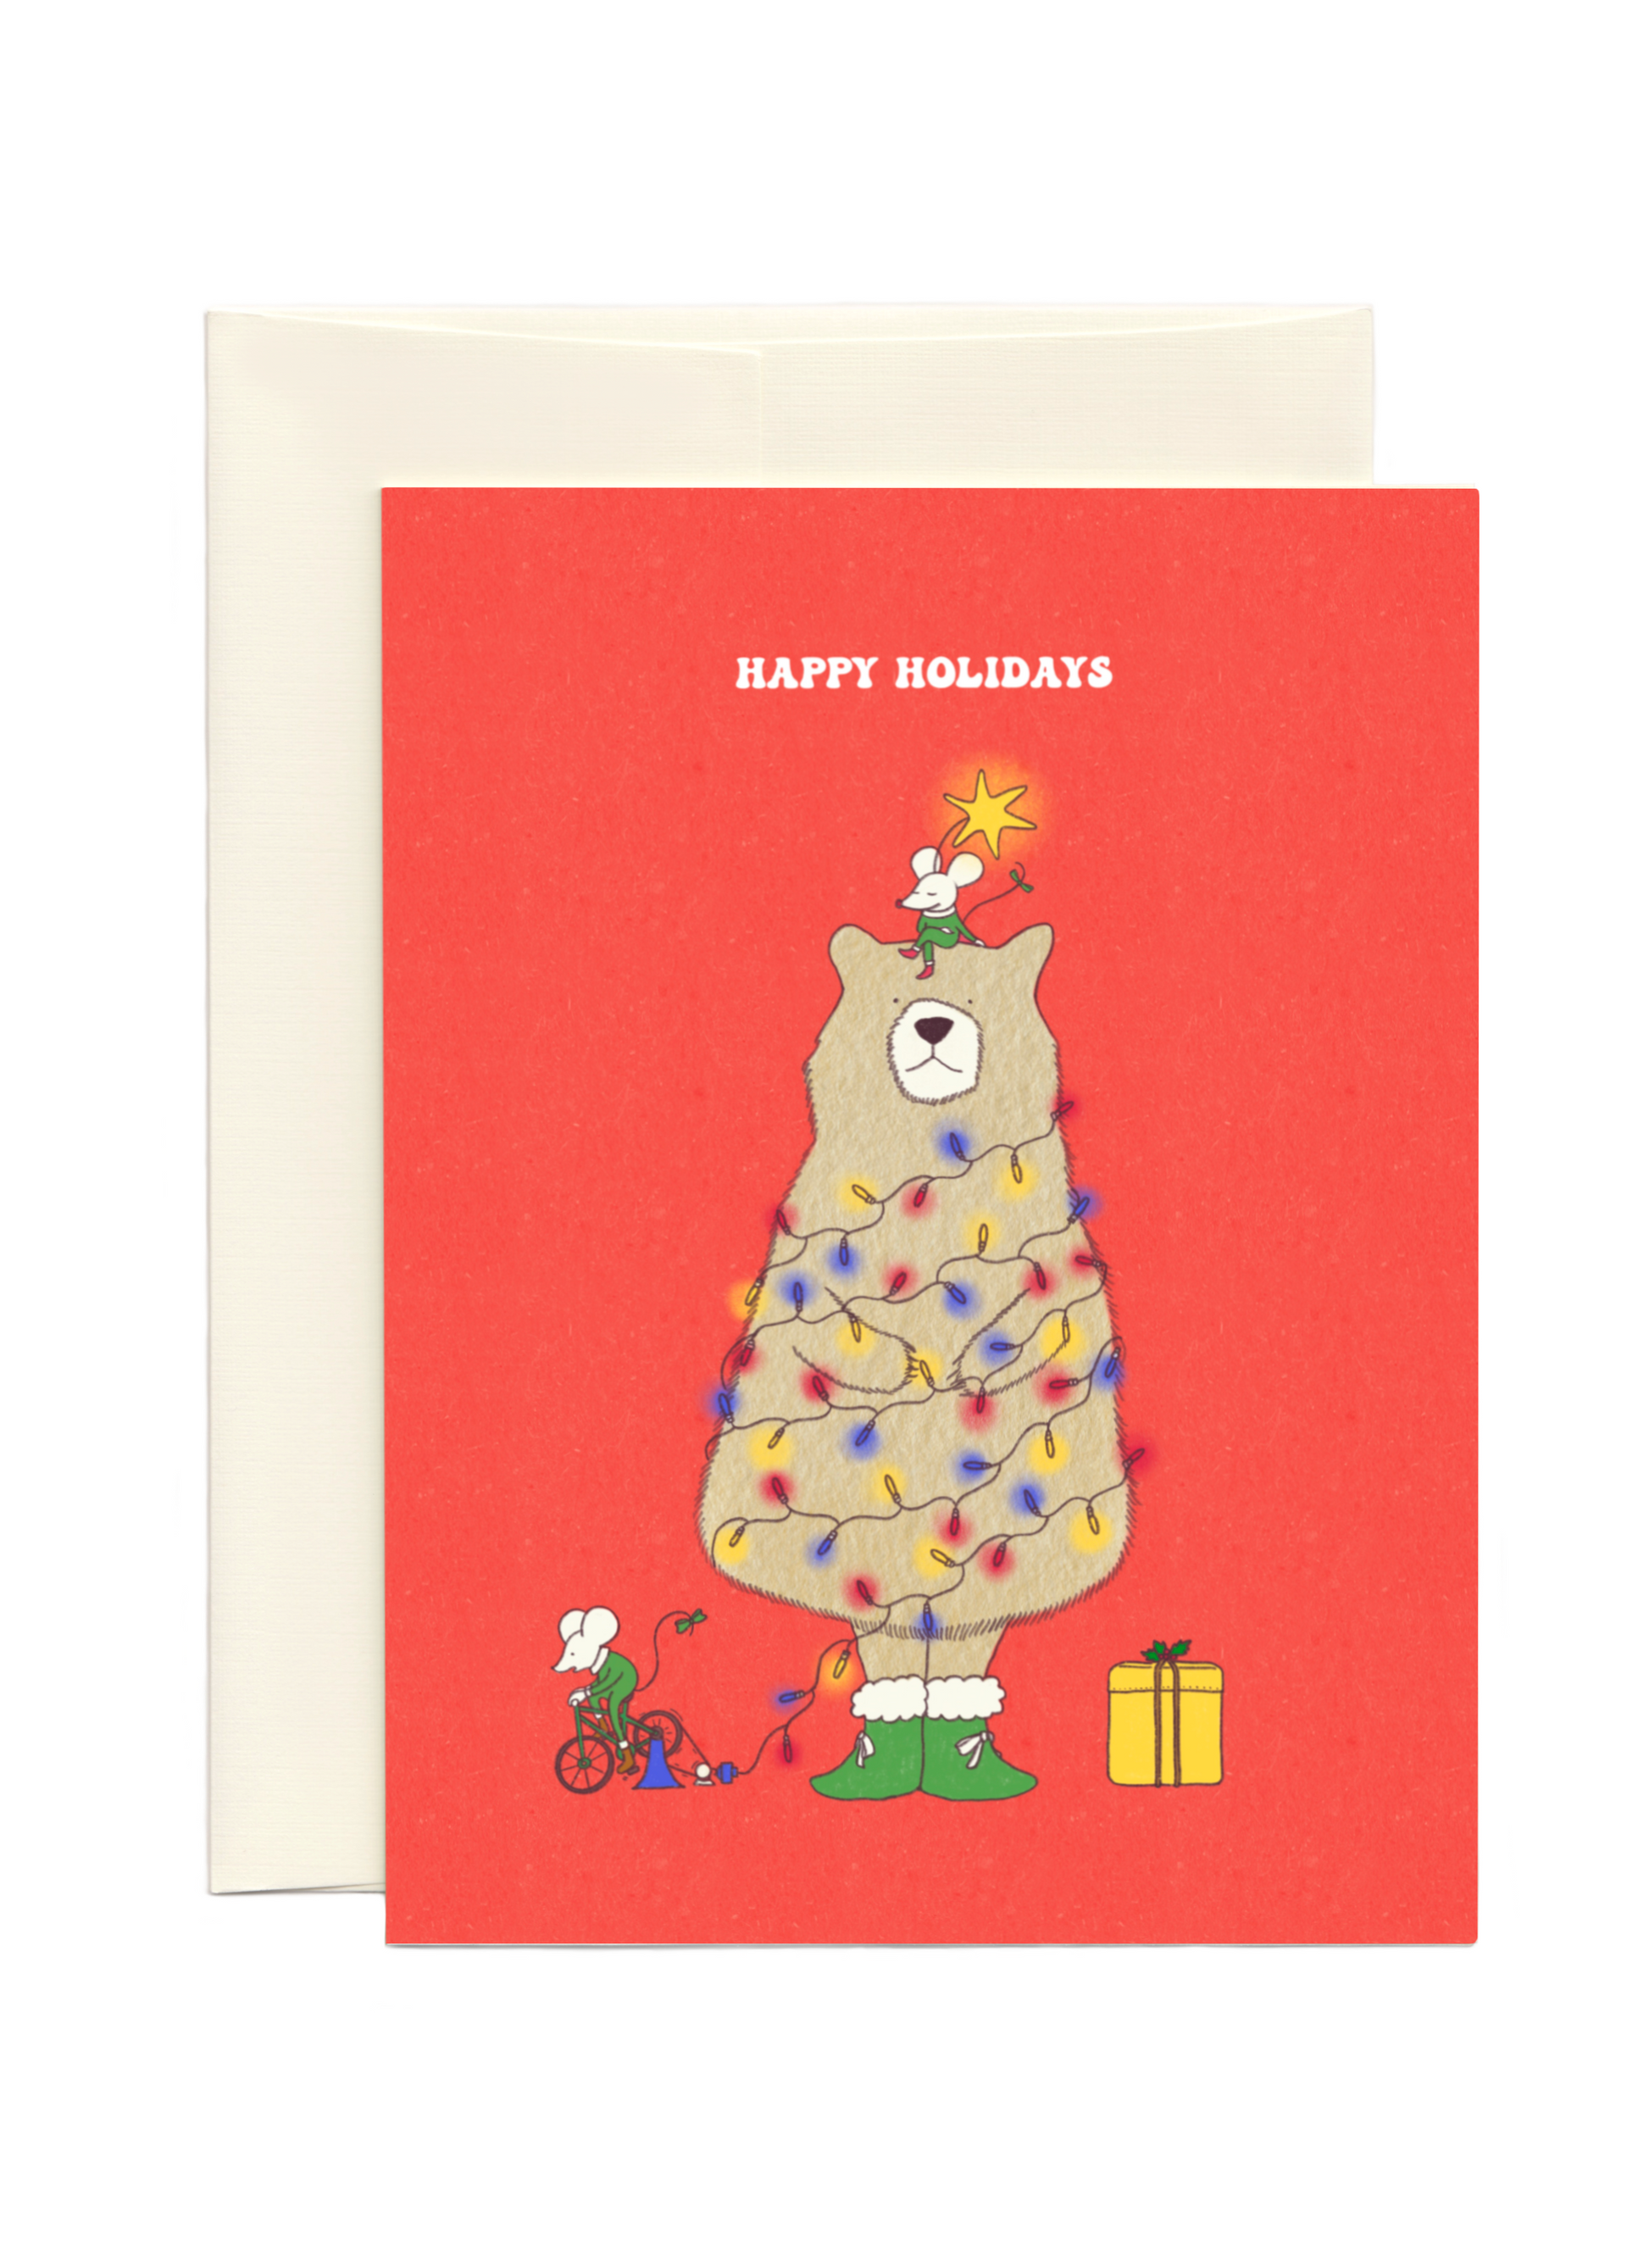 Cute Holiday Card with a bear as a Christmas tree wrapped in lights and two mice around it